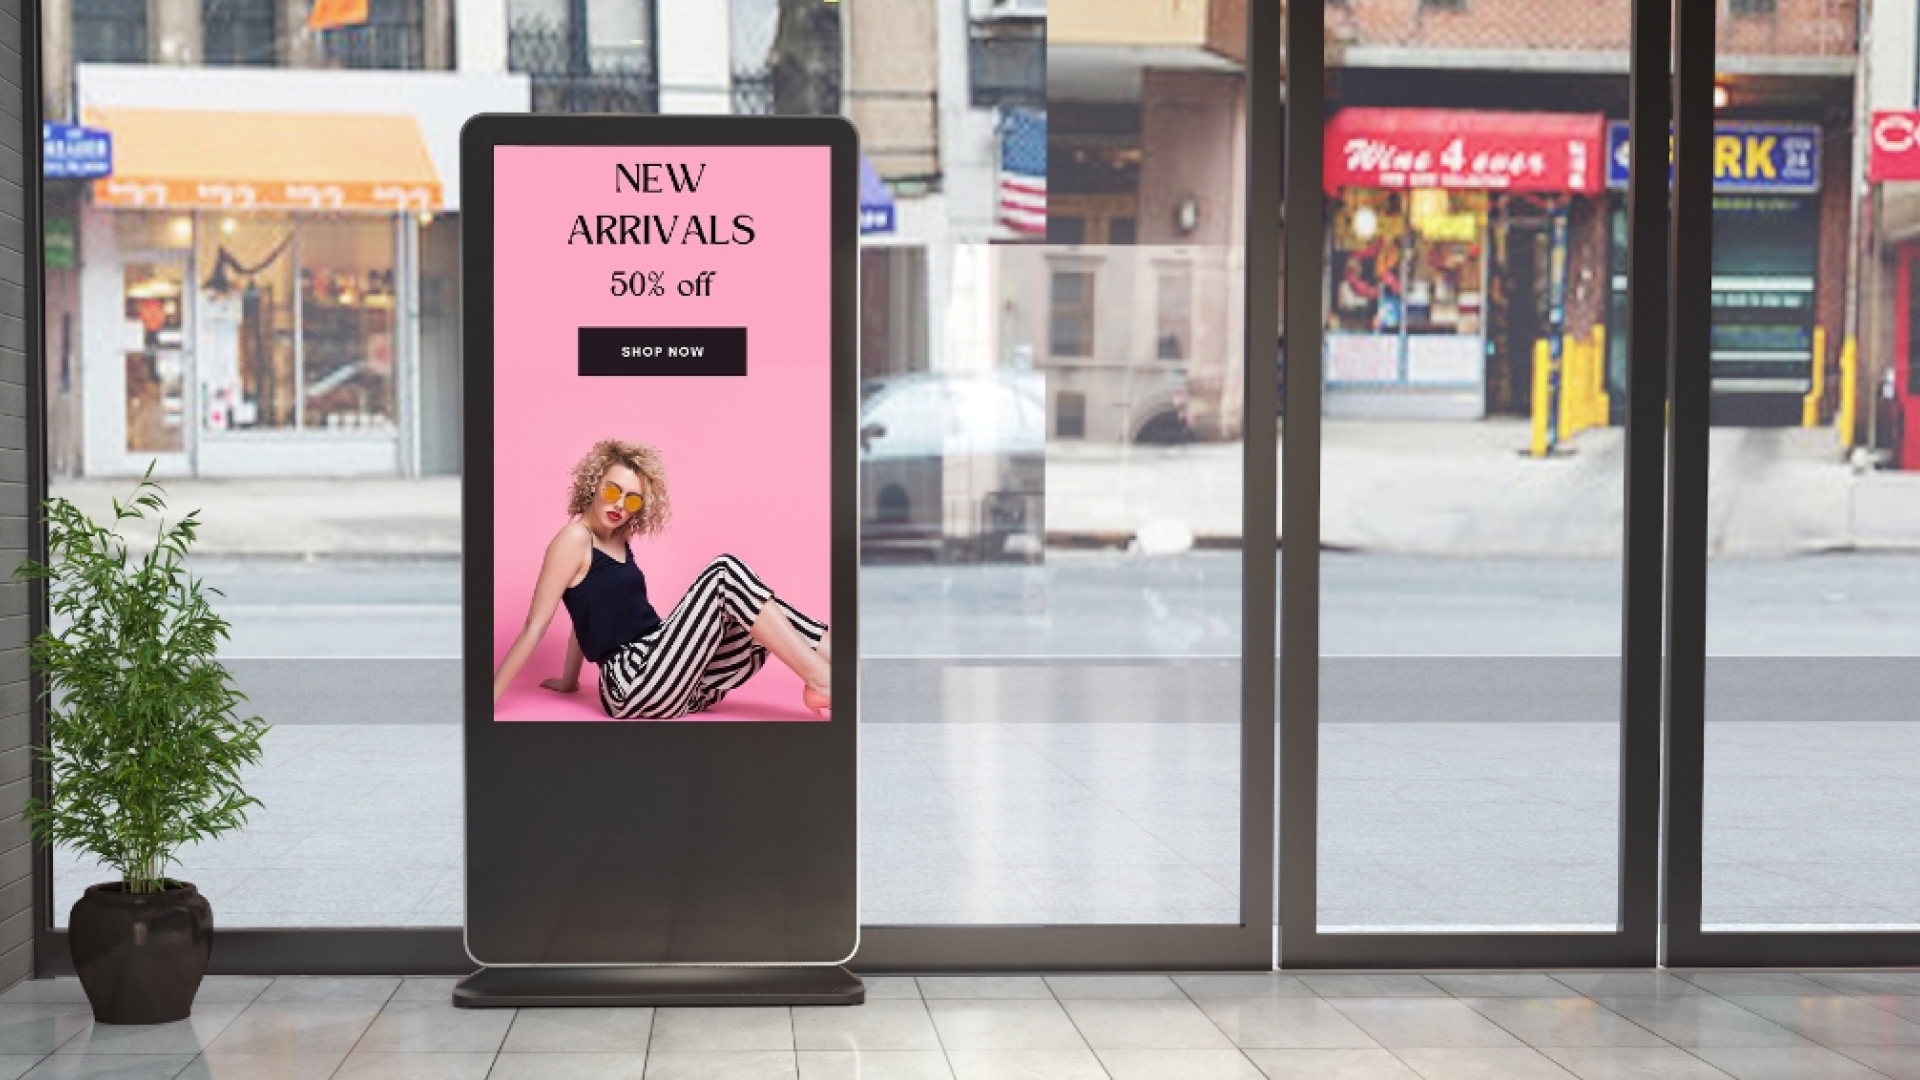 A digital signage display in a store promoting new arrivals with 50% off against a pink background.